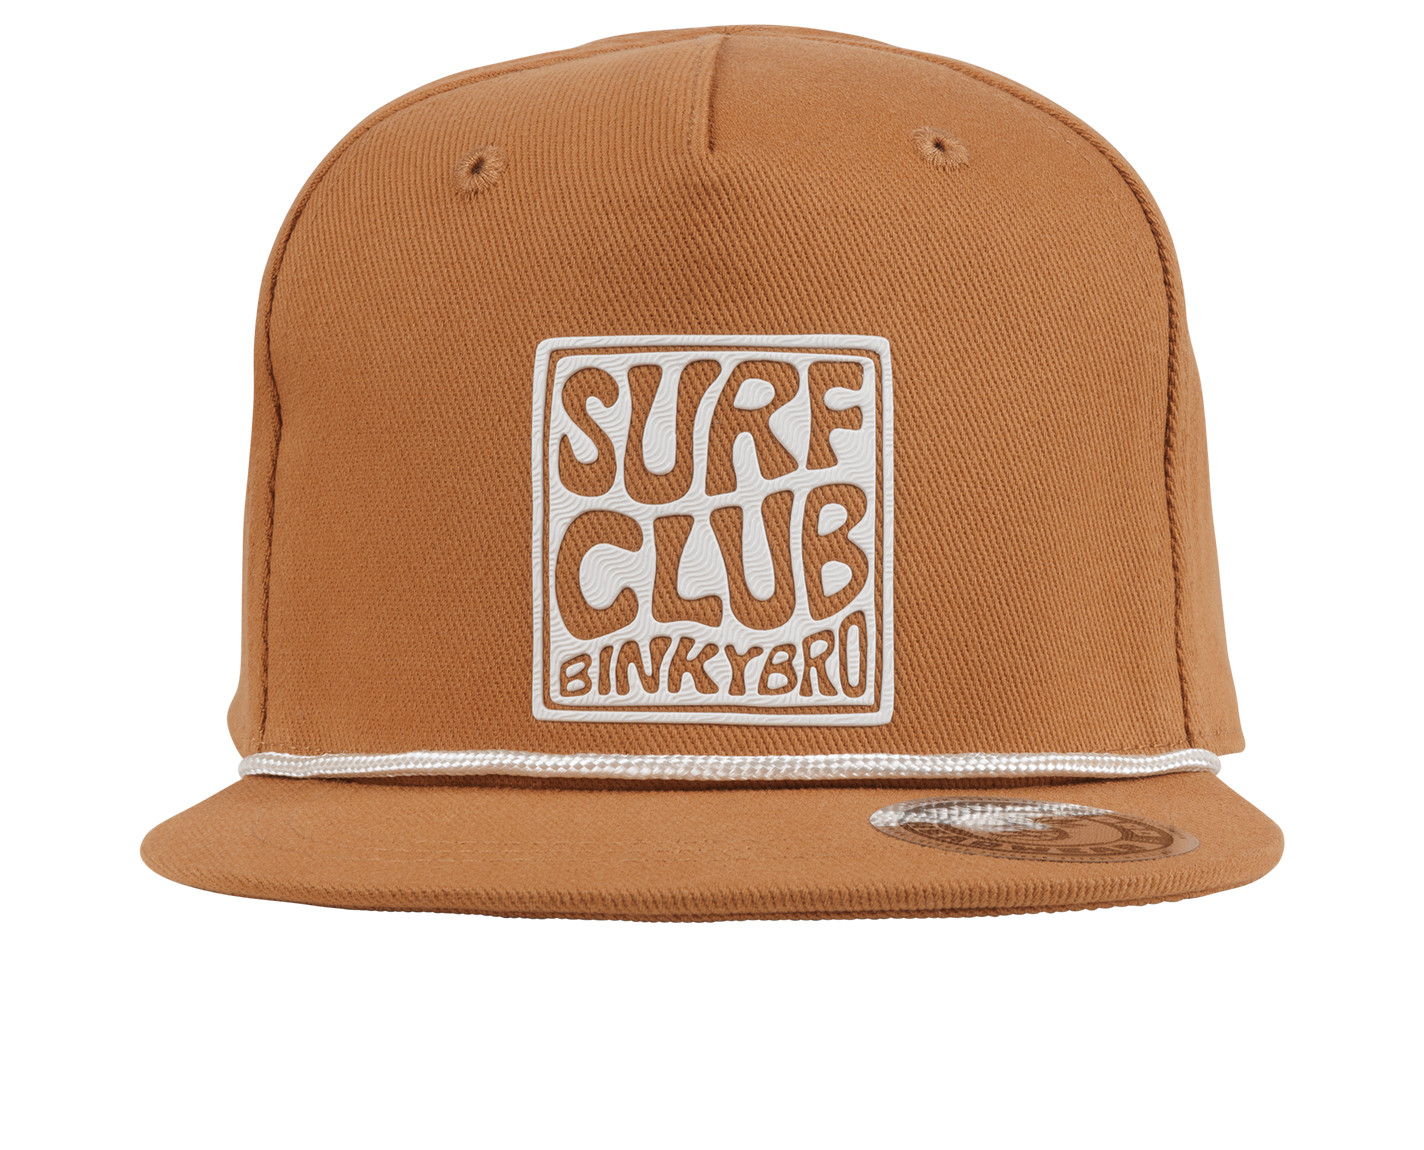 Surf Club Hat: Toddler (12 months - 3 years) / Brown / Standard Fit